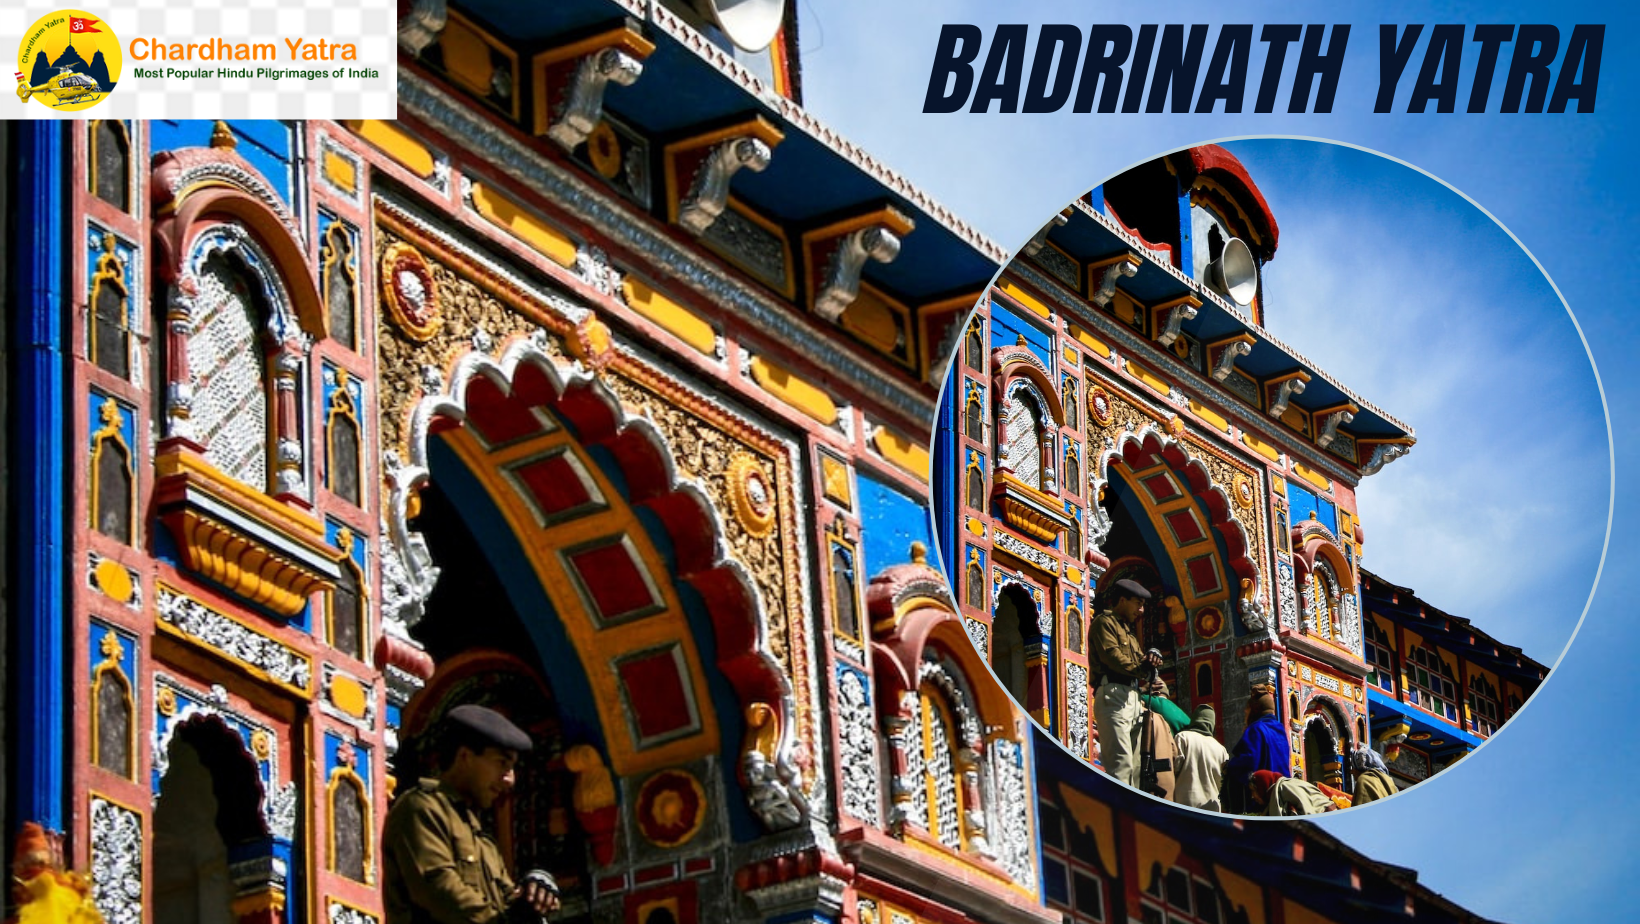 Badrinath Yatra from Delhi: A Journey to the Abode of Lord Vishnu